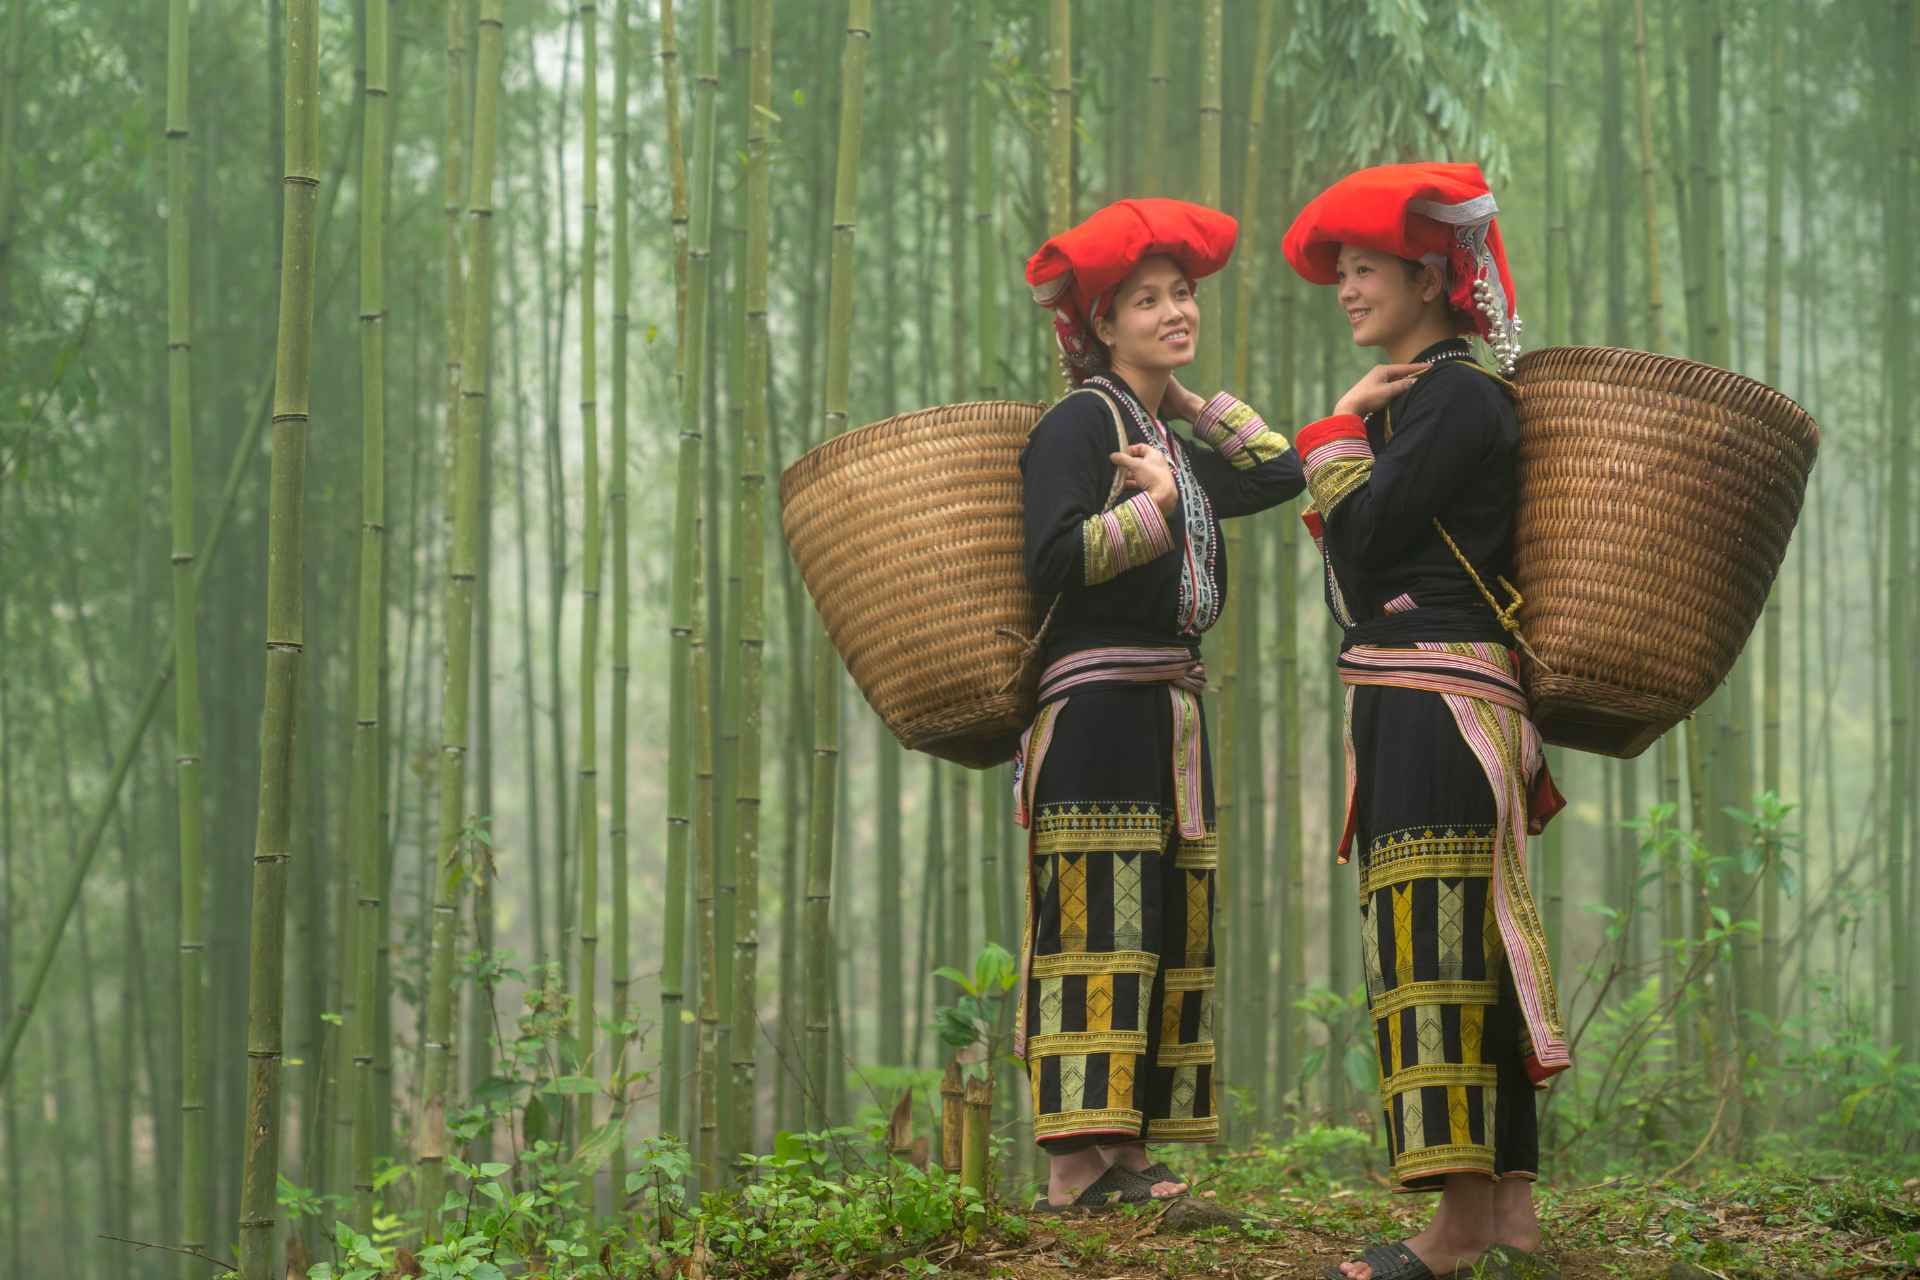 Women in Bamboo Forest